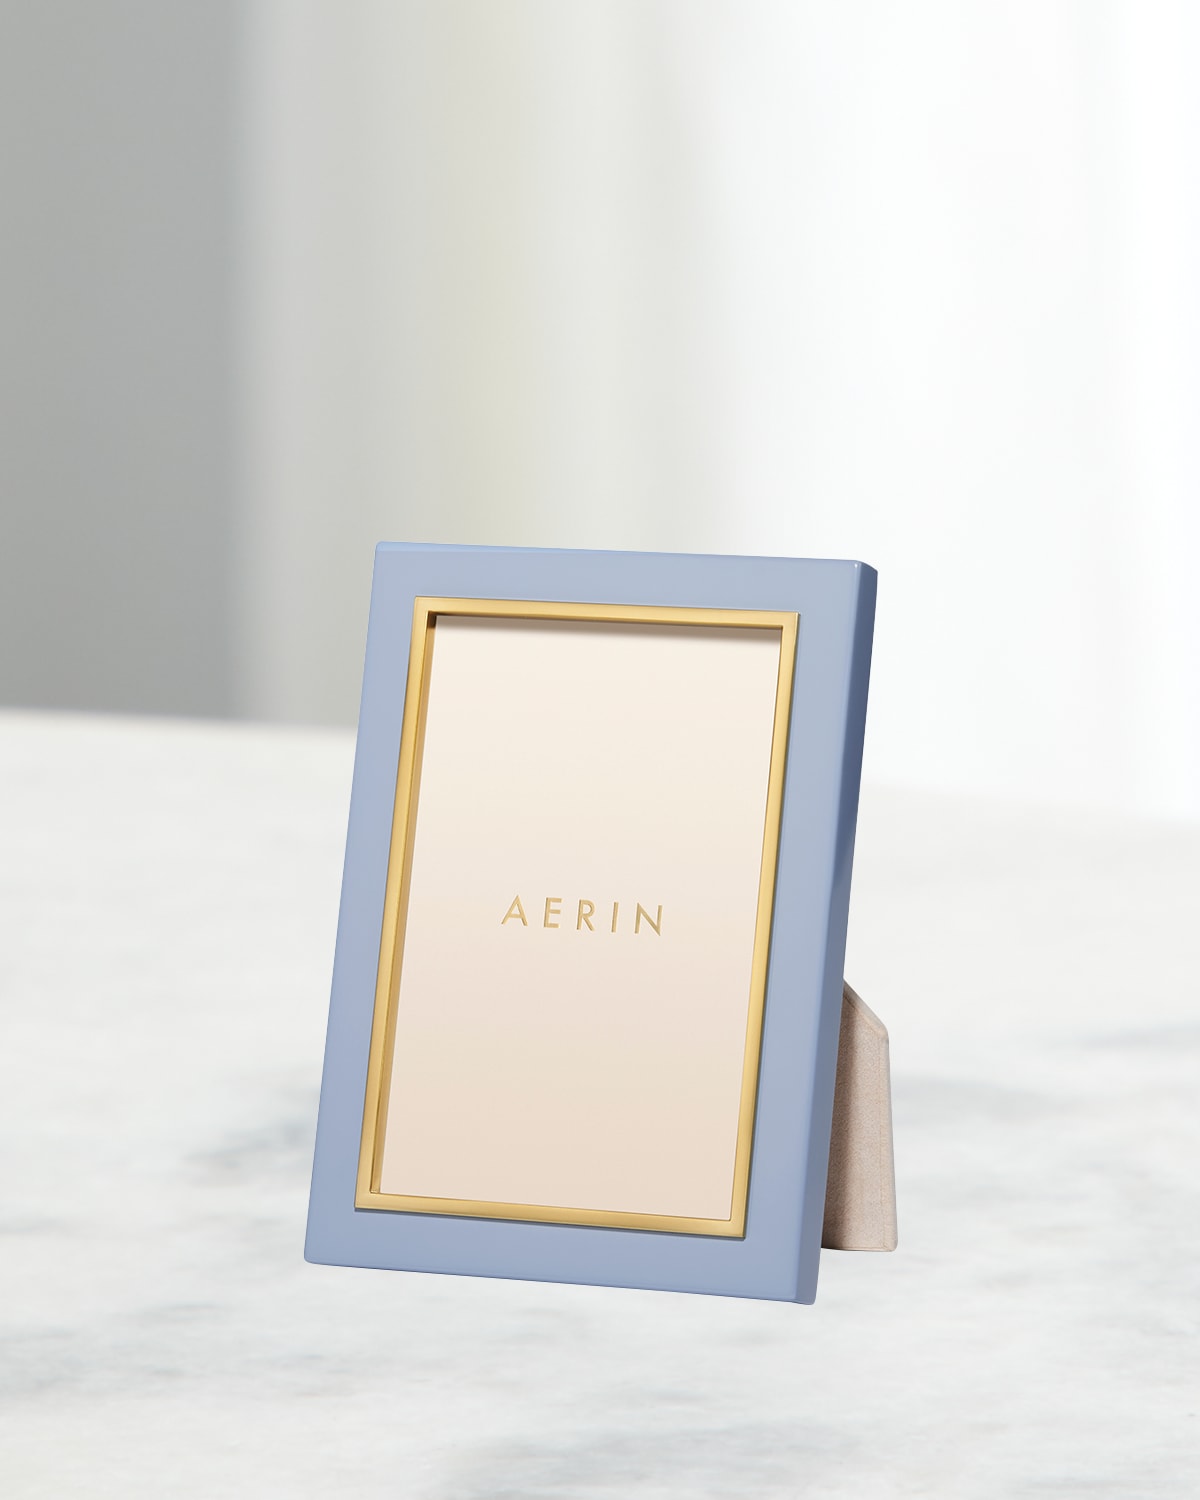 Aerin Varda Lacquer Photo Frame, French Blue - 4x6